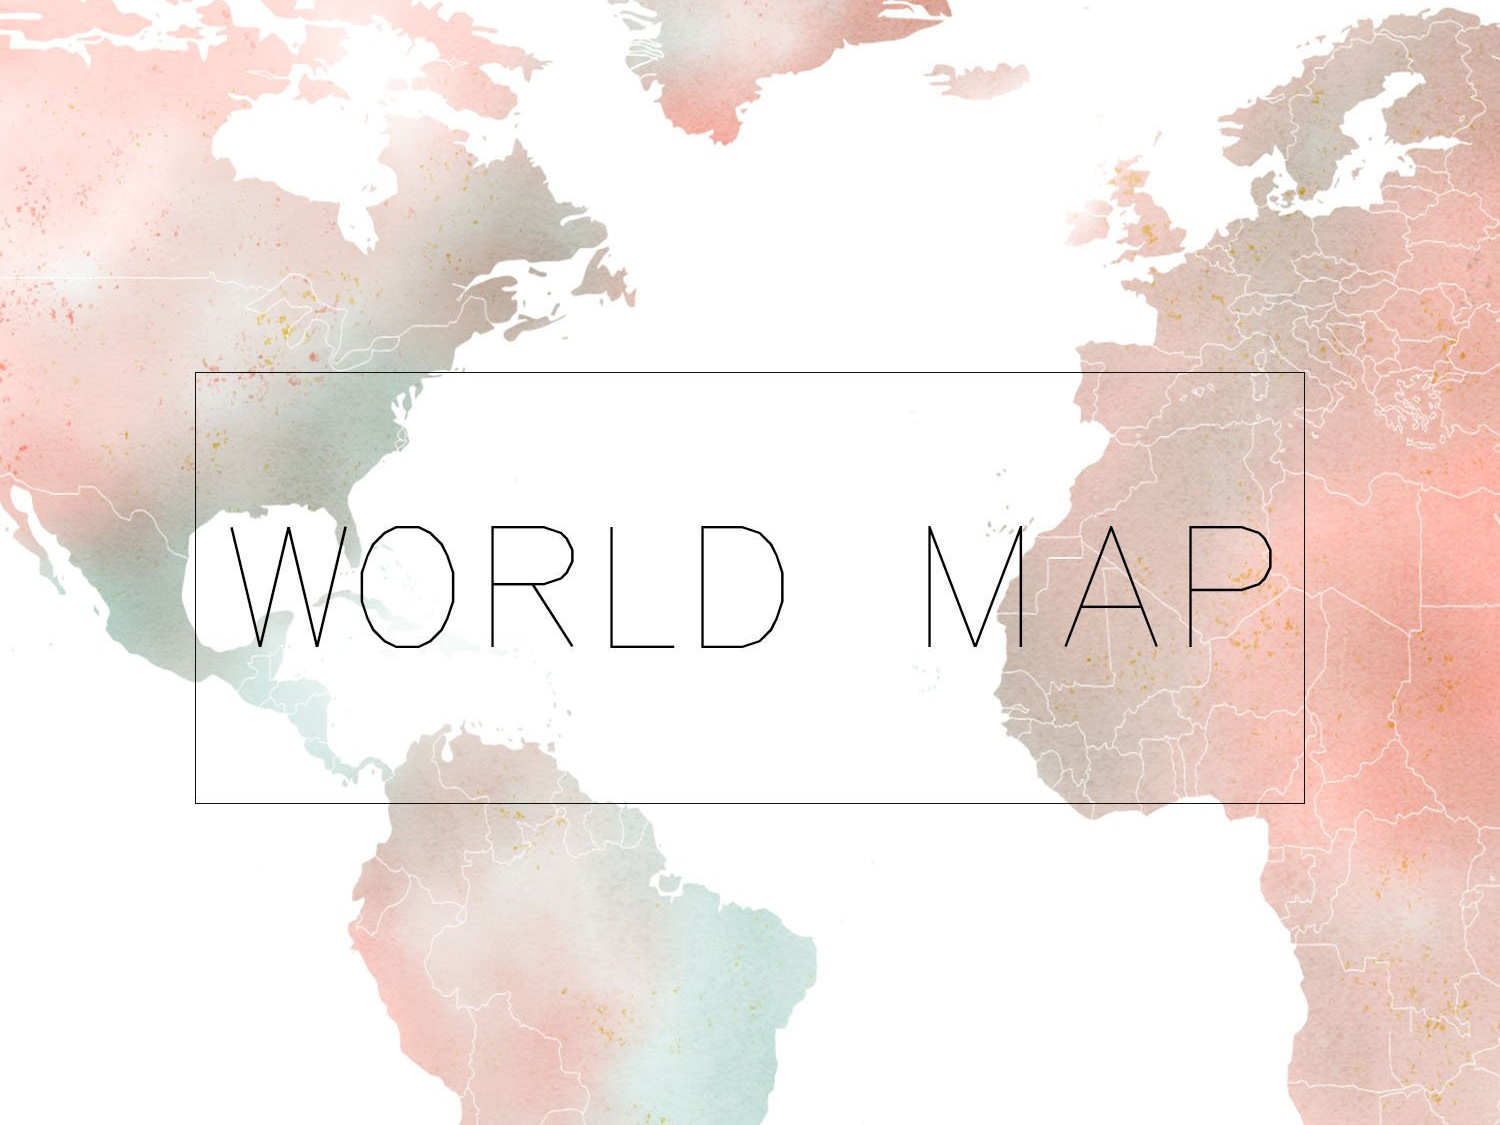 World Map Watercolor PNG Clipart by turnip on Dribbble.